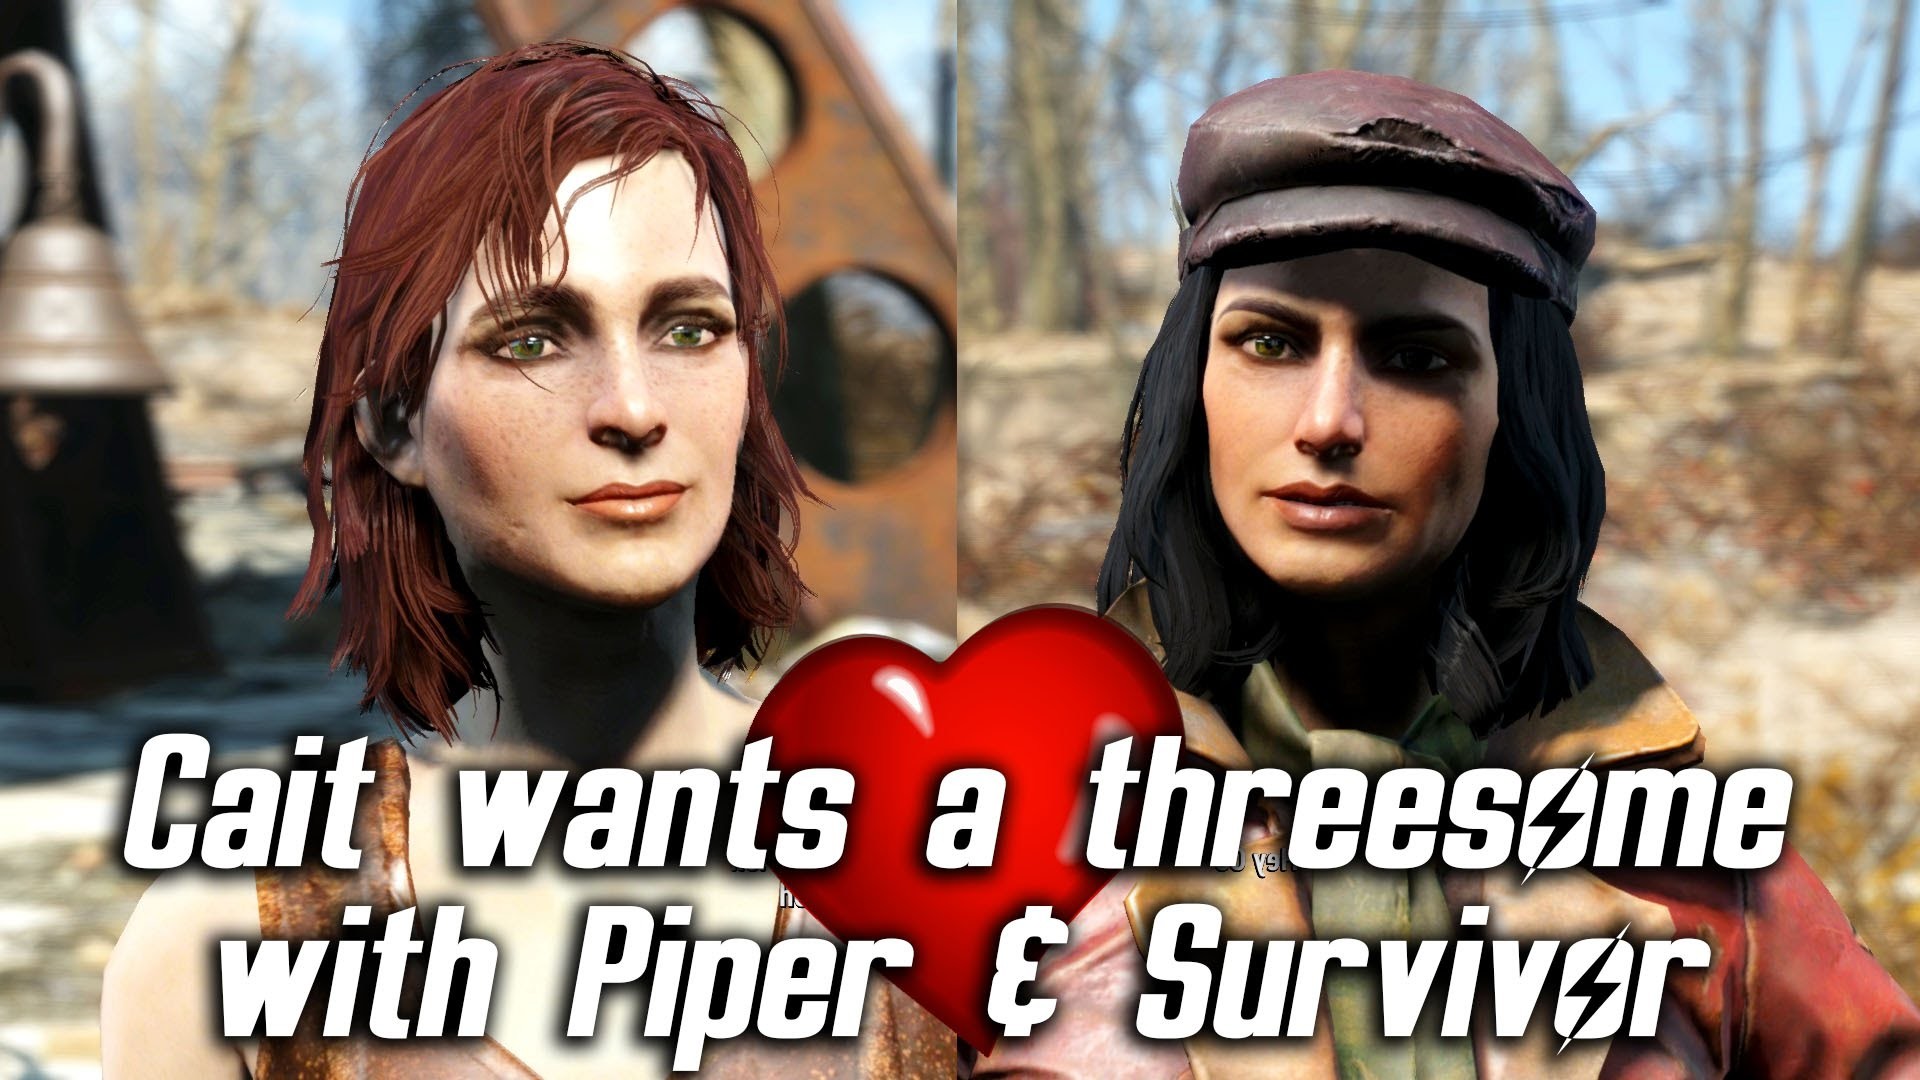 1920x1080 Fallout 4 - Cait wants a threesome with Piper & Sole Survivor - YouTube